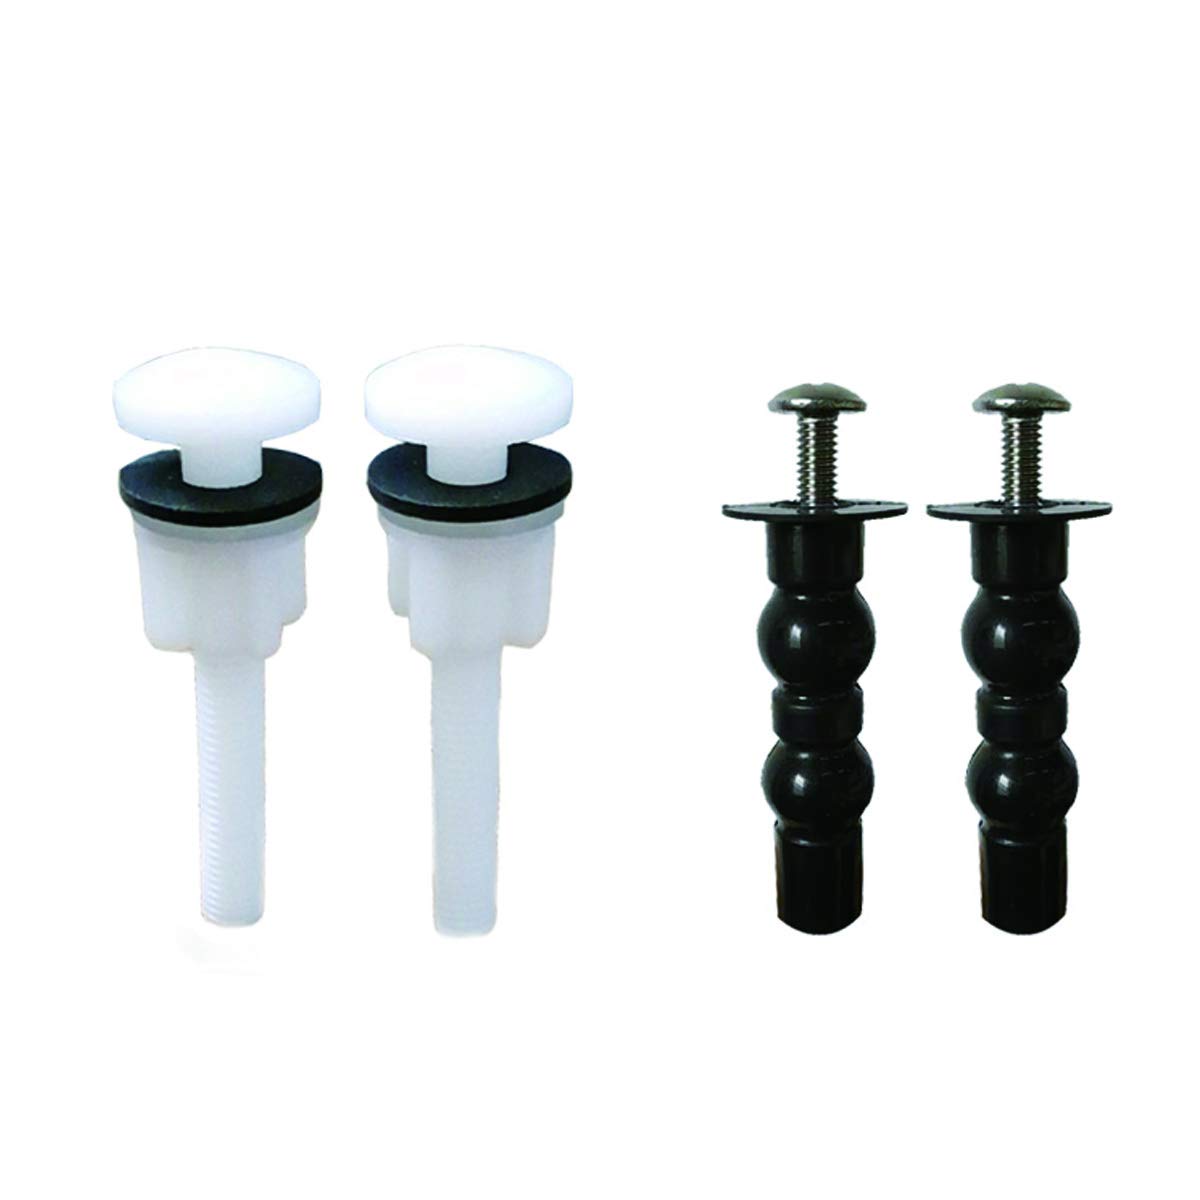 Toilet Seat Hinge Bolts and Nuts with Washers 2 Types - Plastic